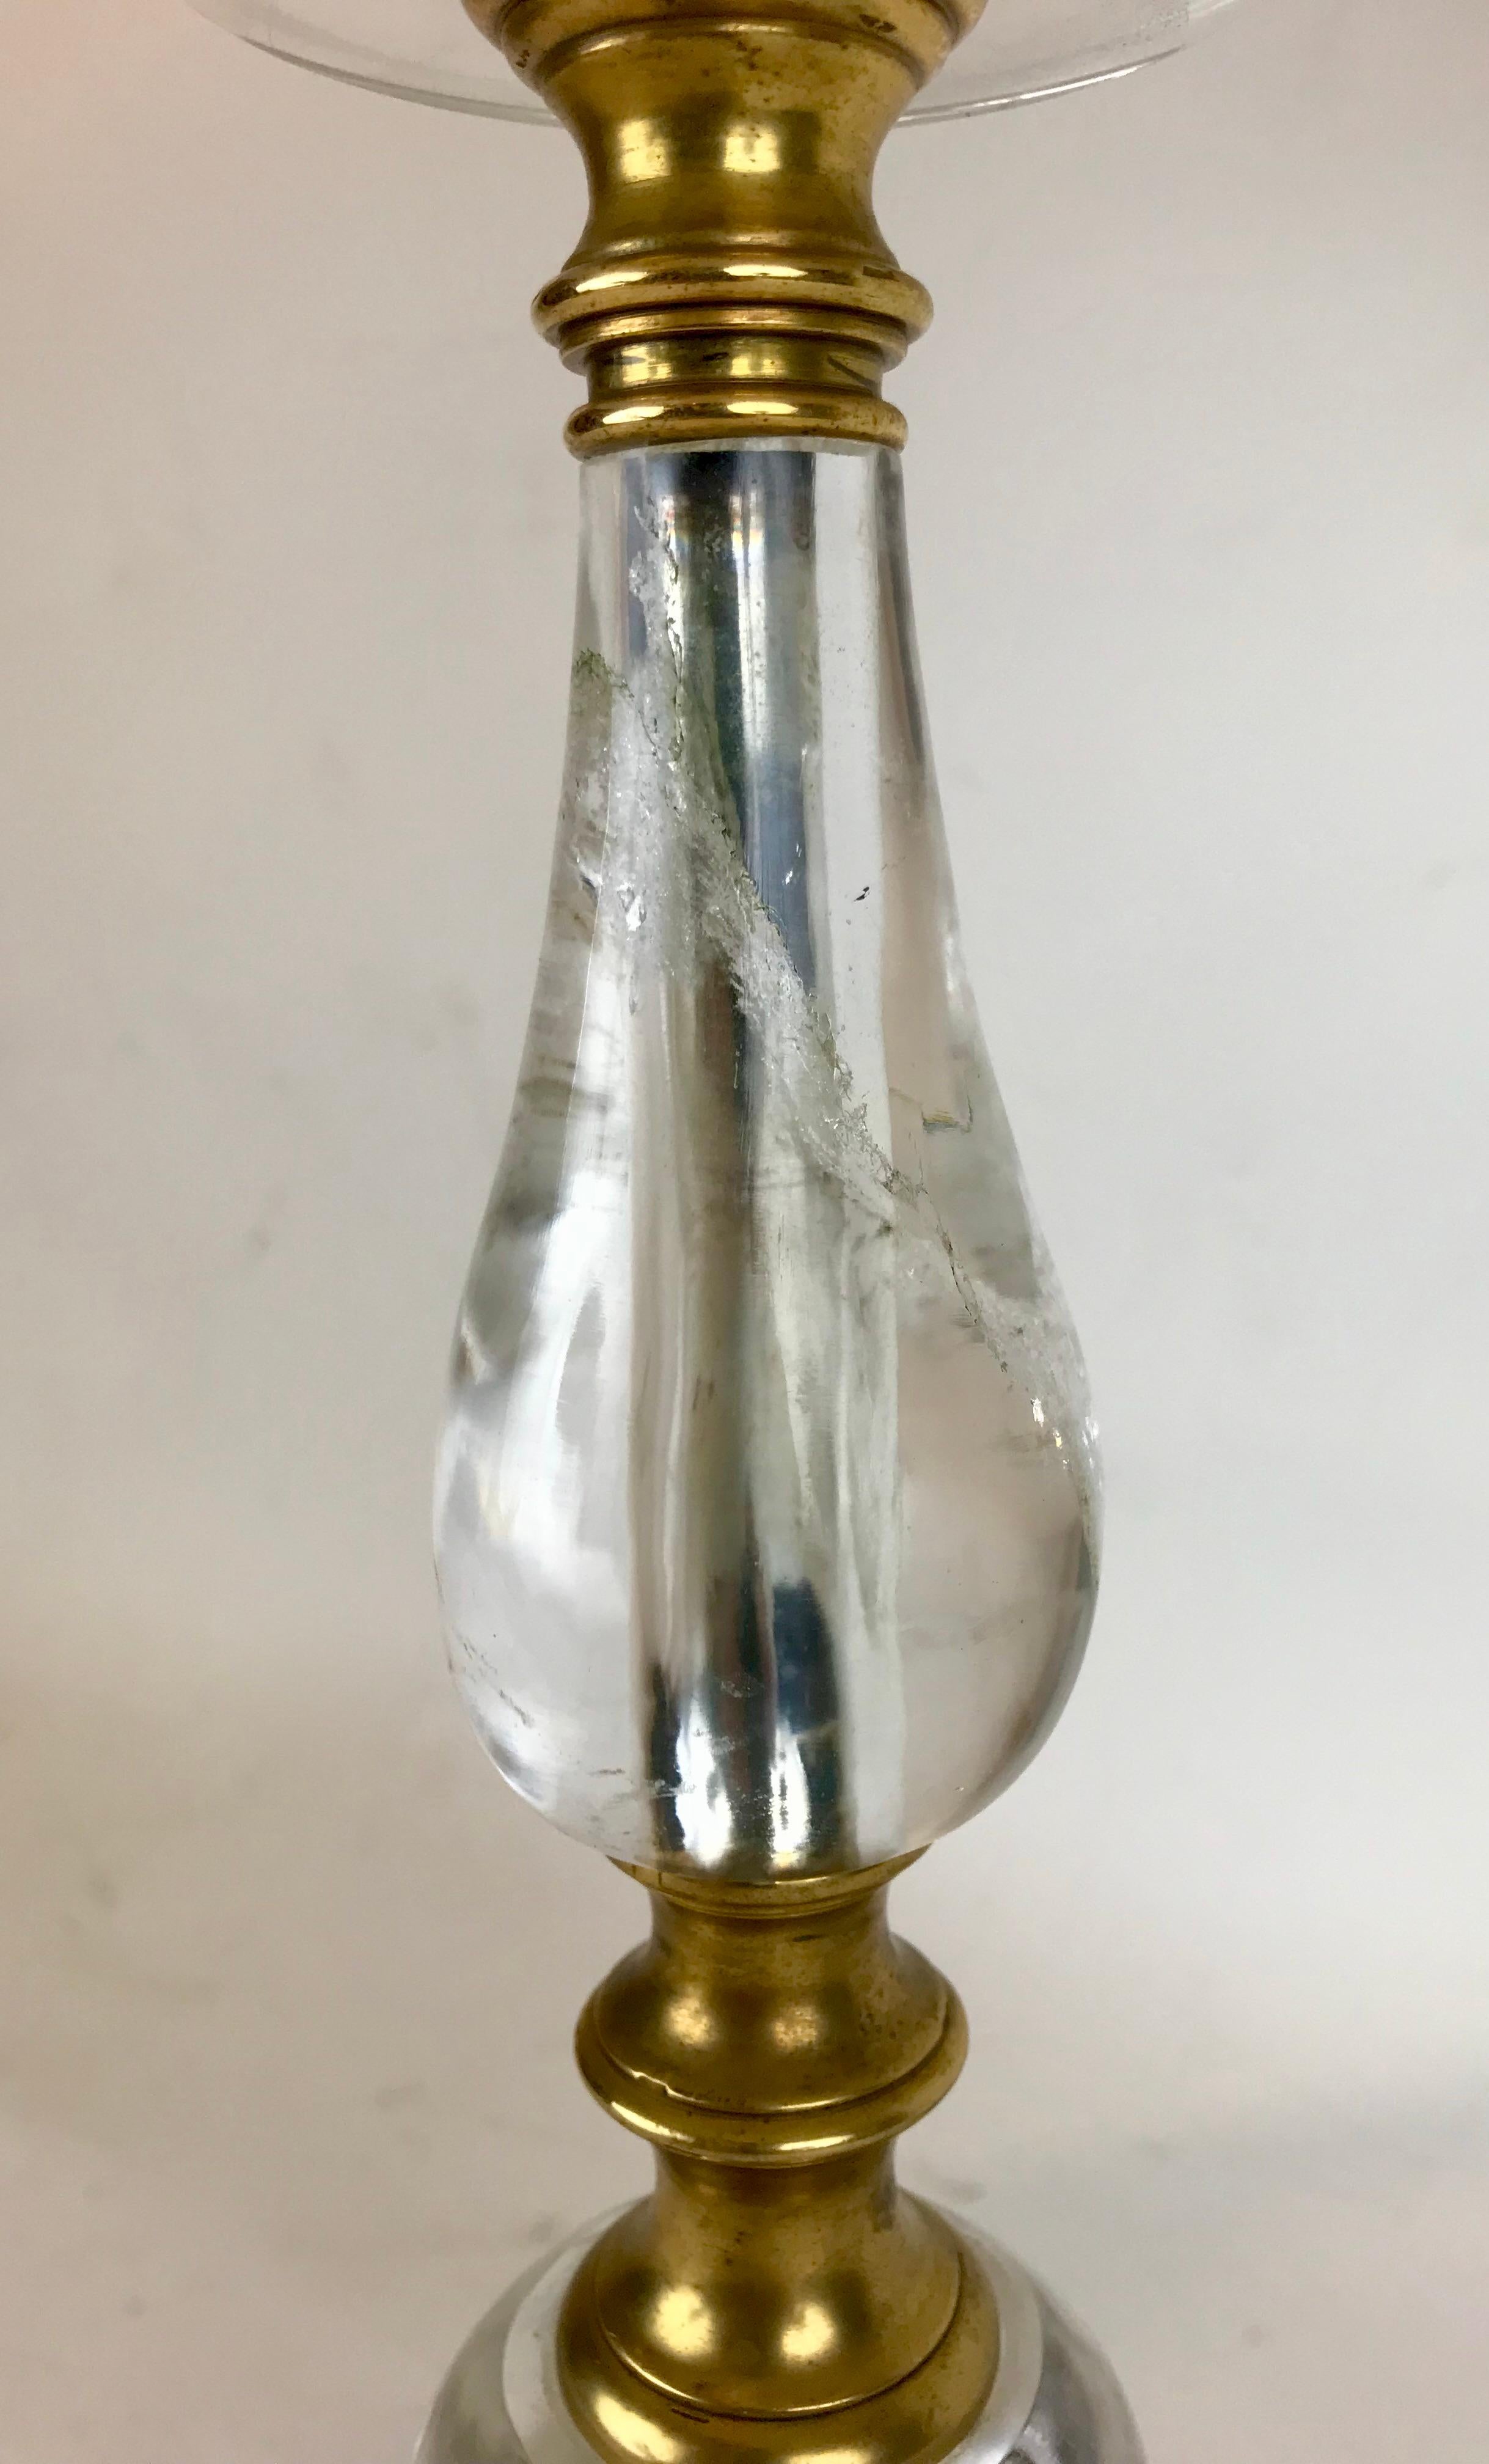 Rock Crystal and Gilt Bronze Pricket Form Lamp Attributed to F. F. Caldwell For Sale 7